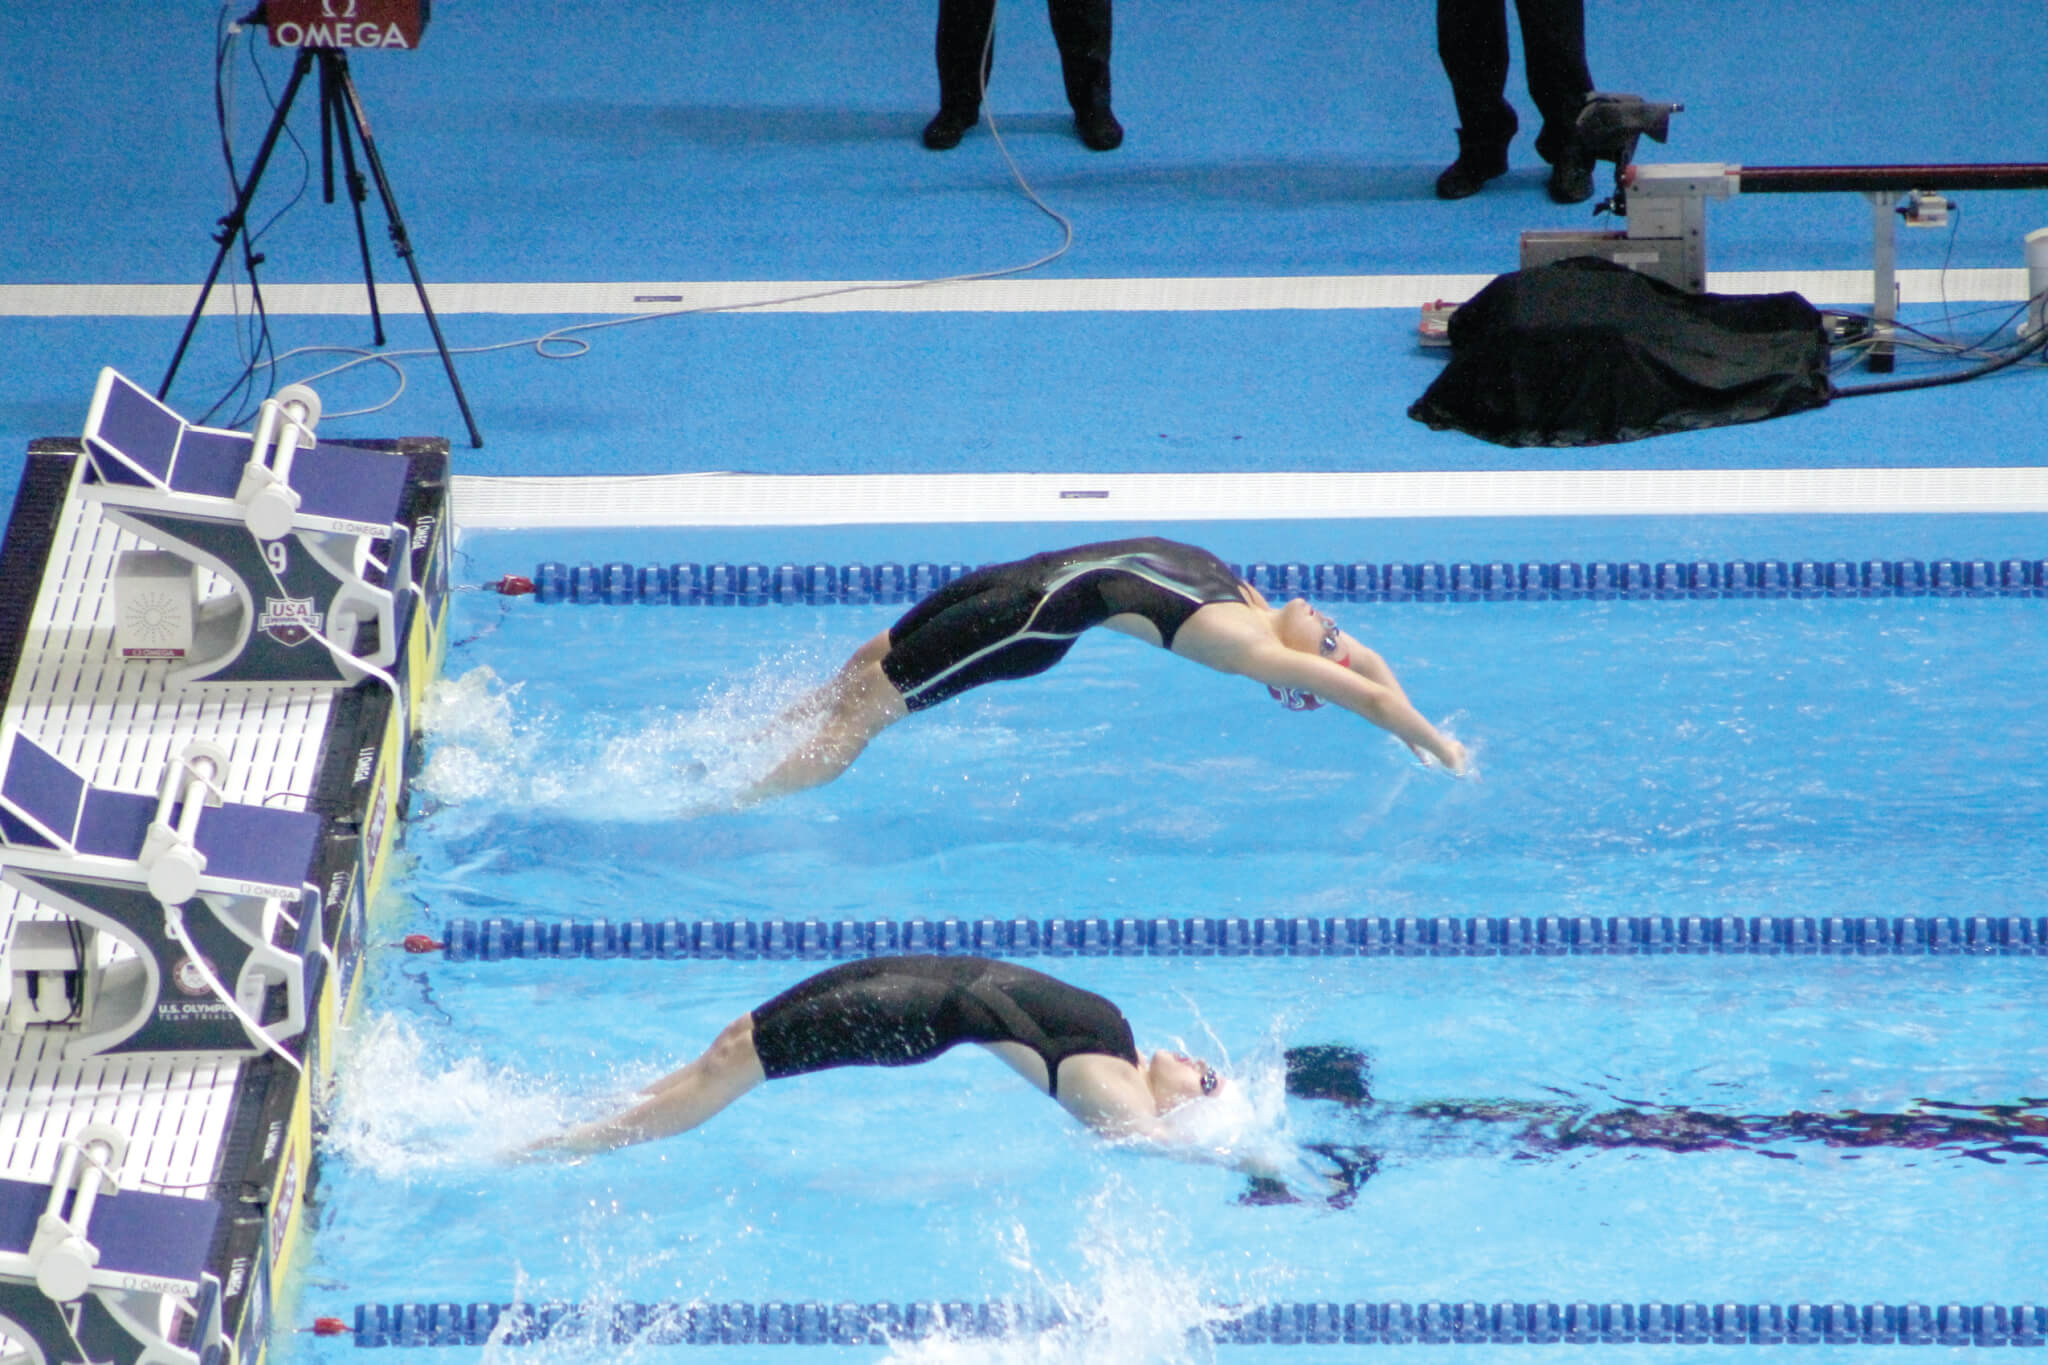 Steiner swimmer Kendall Shields, in the top lane, competed in the U.S. Olympic Trials recently in two events, the women’s 100 and 200 meter backstroke. 